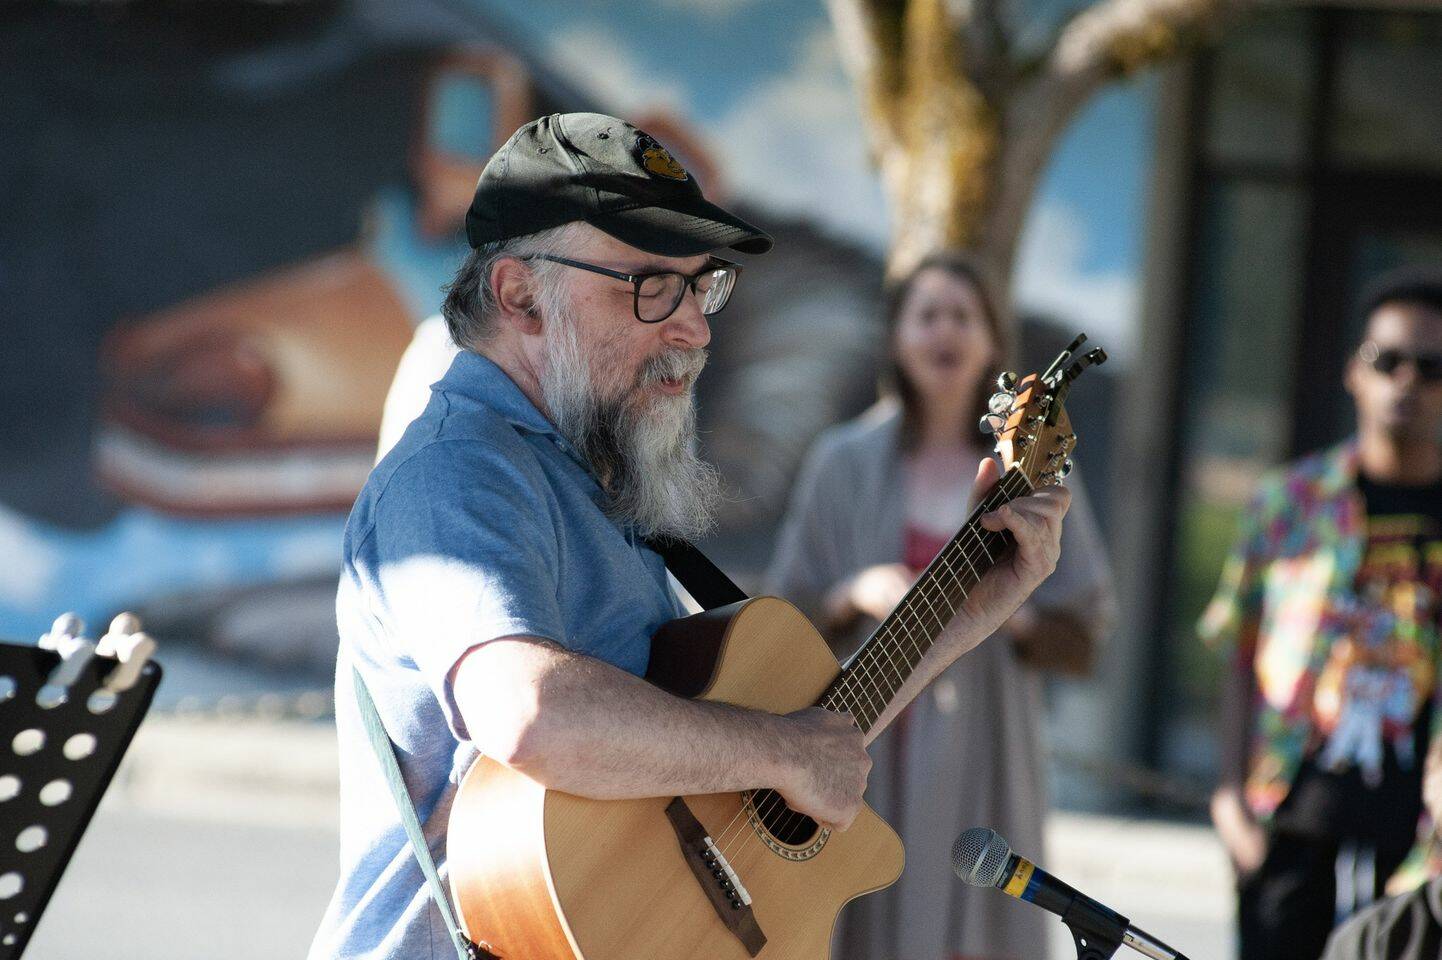 Courtesy of Theater Alaska
Longtime Juneau musician Rob Cohen performs at an outdoor cabaret show during the Alaska Theater Festival in 2022. This year’s festival will begin with a series of Neighborhood Cabaret shows at various locations throughout Juneau between June 28 and July 2.